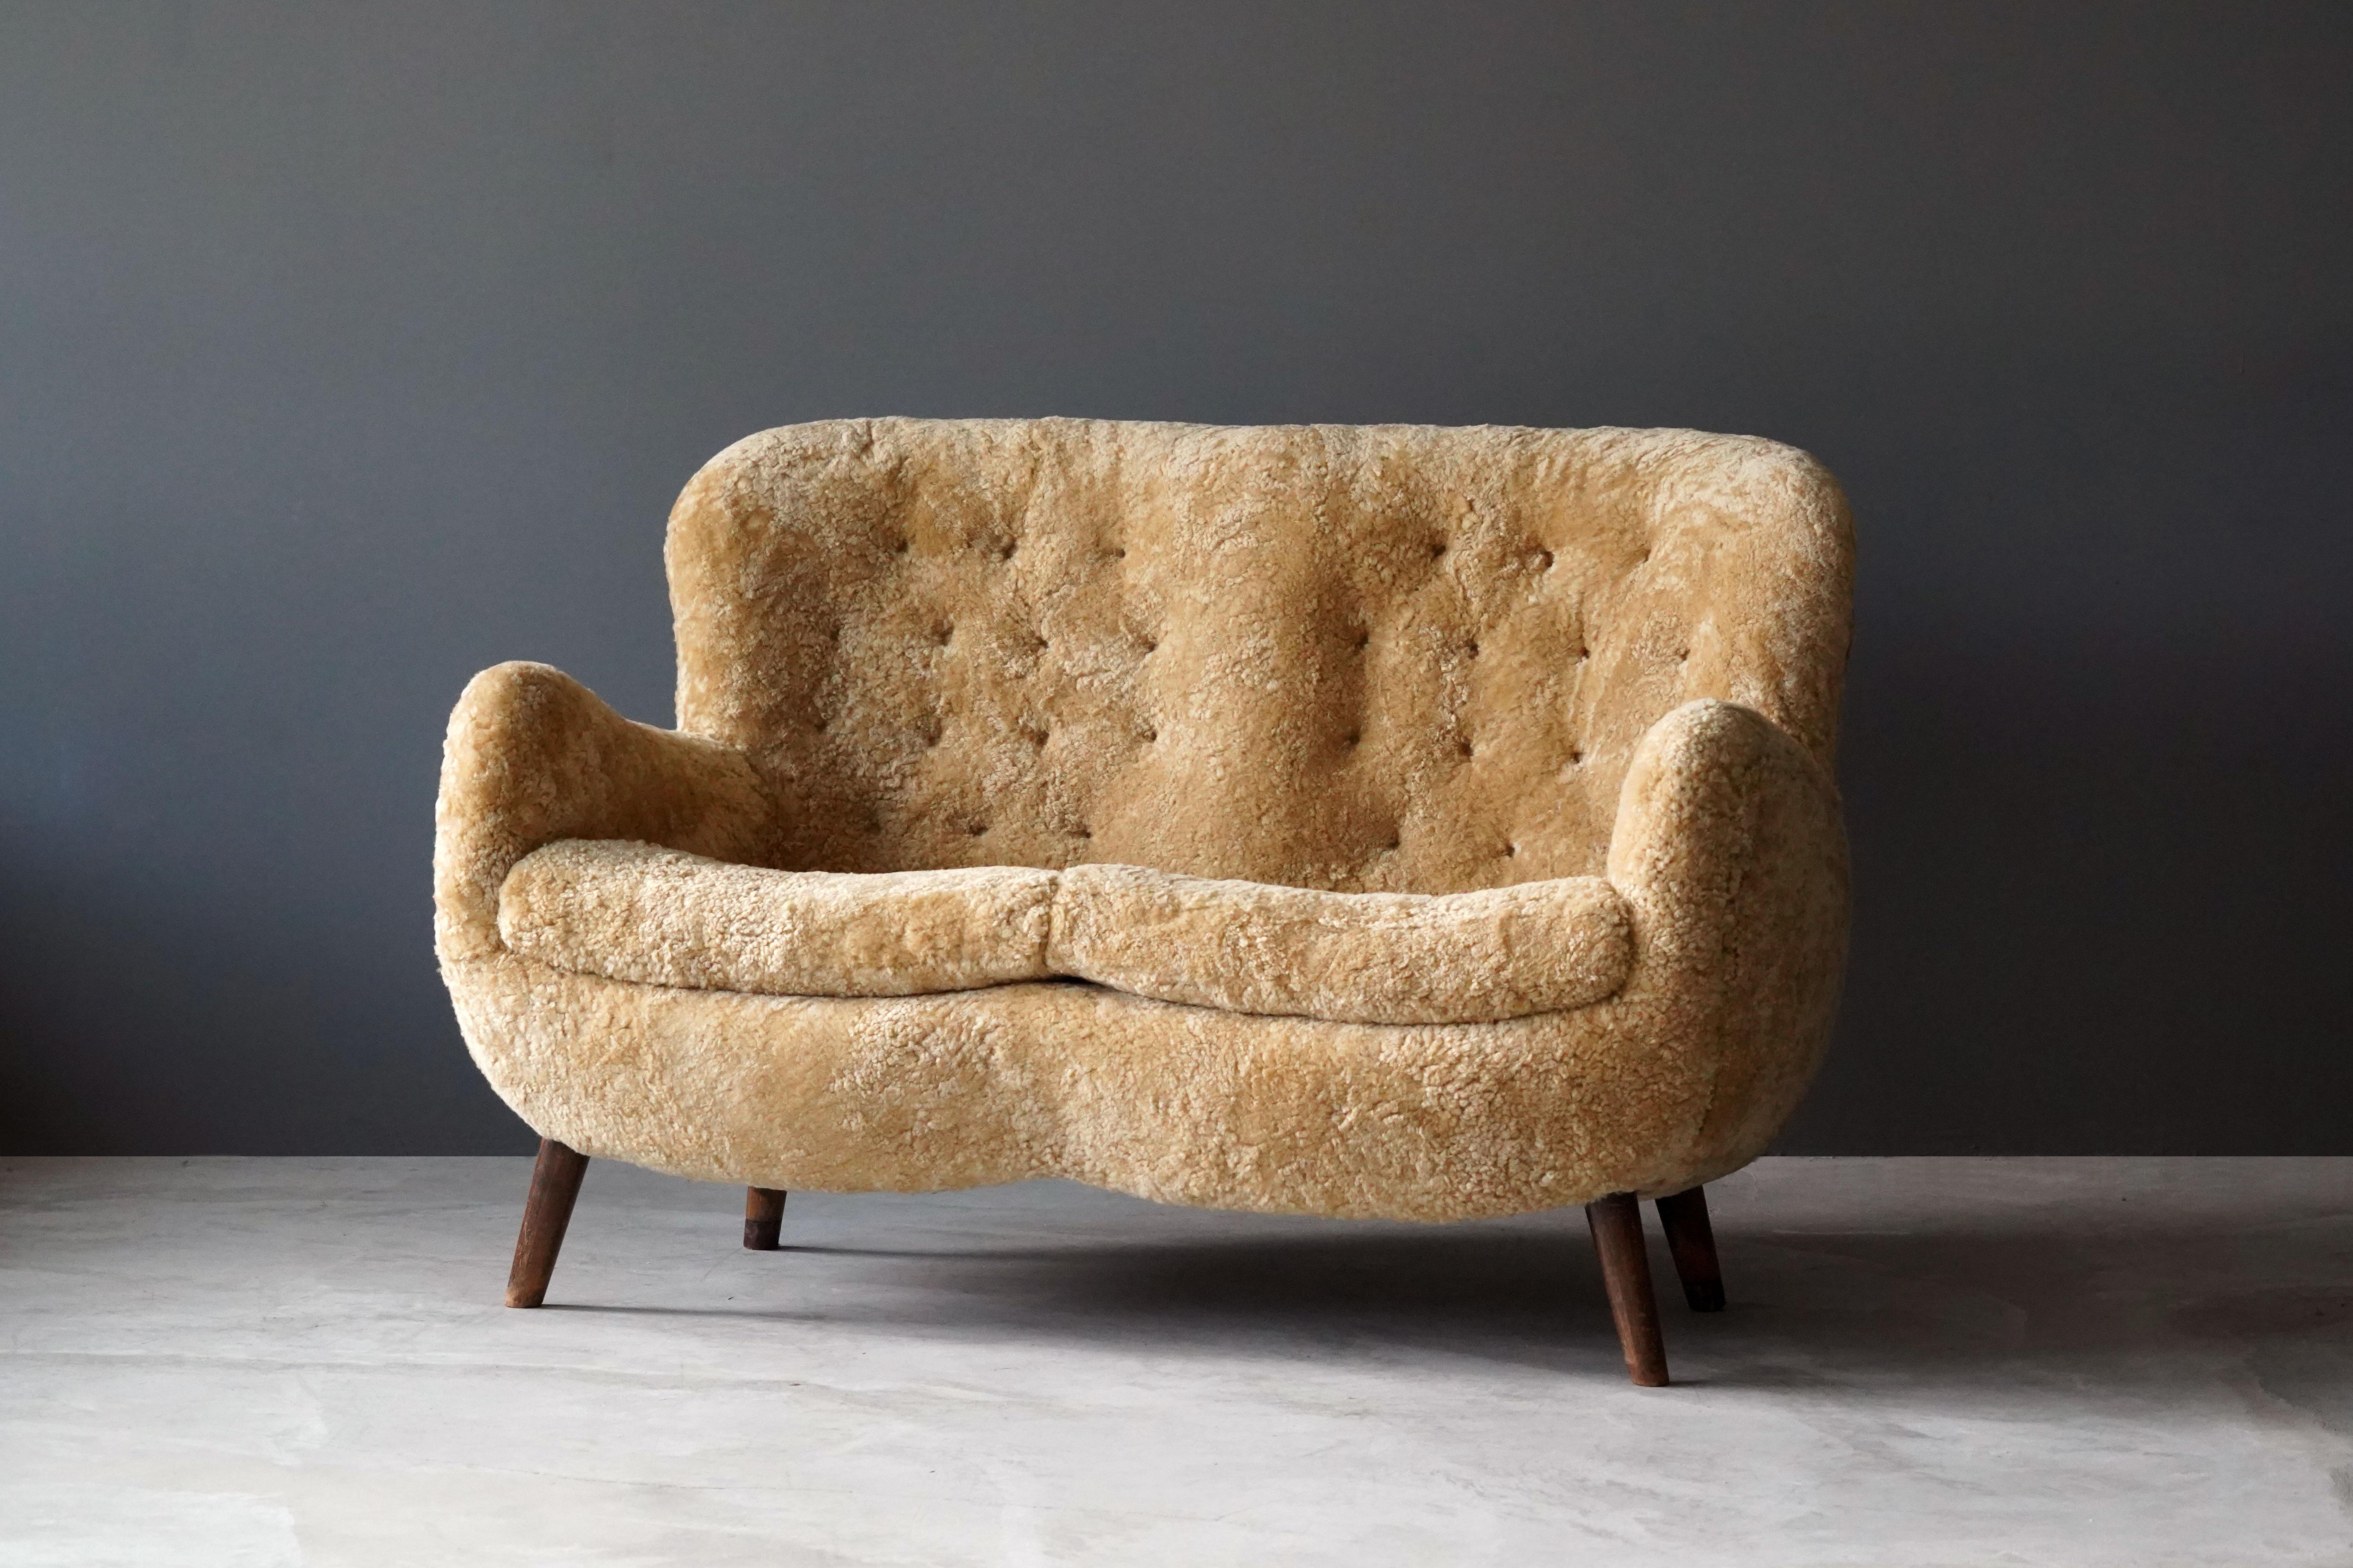 An example of early Danish modernism.

Upholstered in beige sheepskin contrasting dark wooden legs.

Frits Schlegel was a Danish modernist architect active during the same era as Flemming and Mogens Lassen, Philip Arctander, Viggo Boesen.